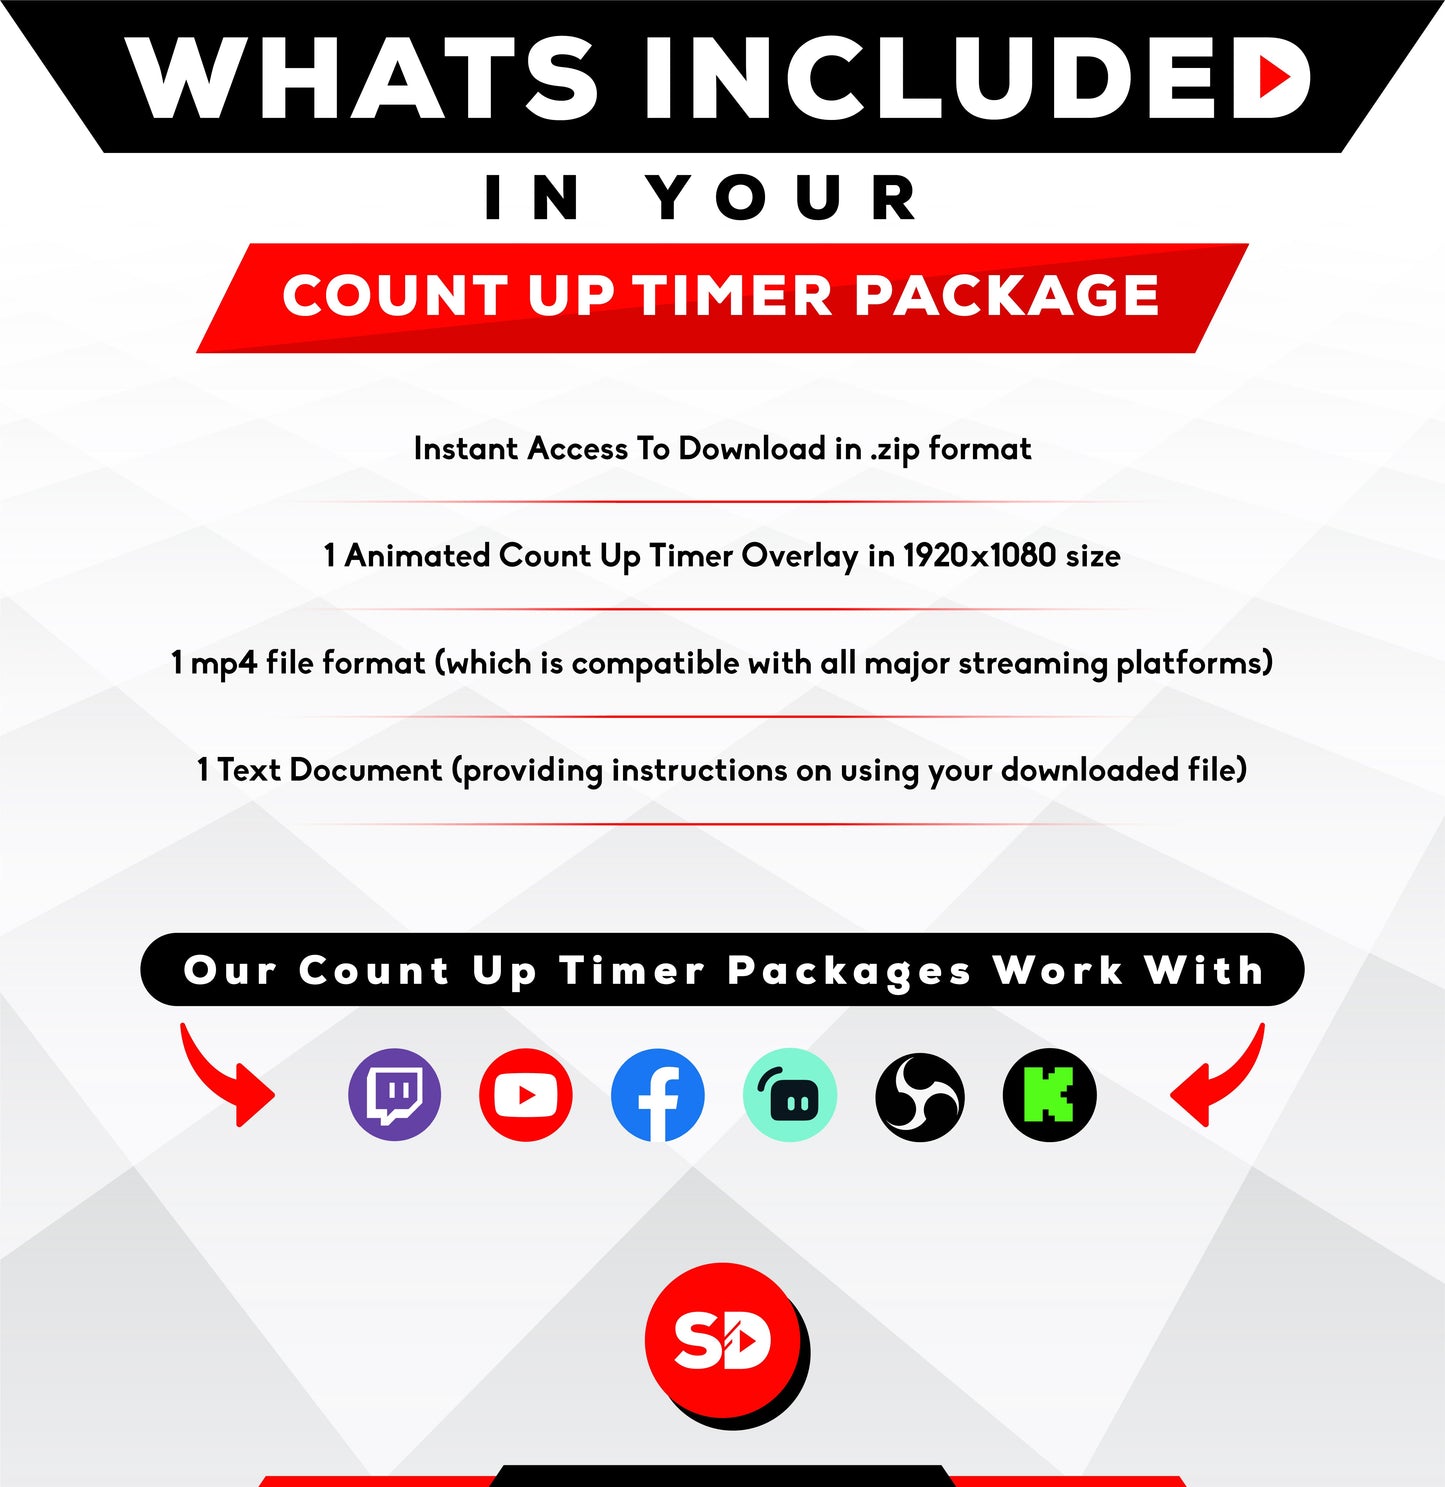 whats included in your package - 5 minute count up timer thumbnail - pixel world - stream designz